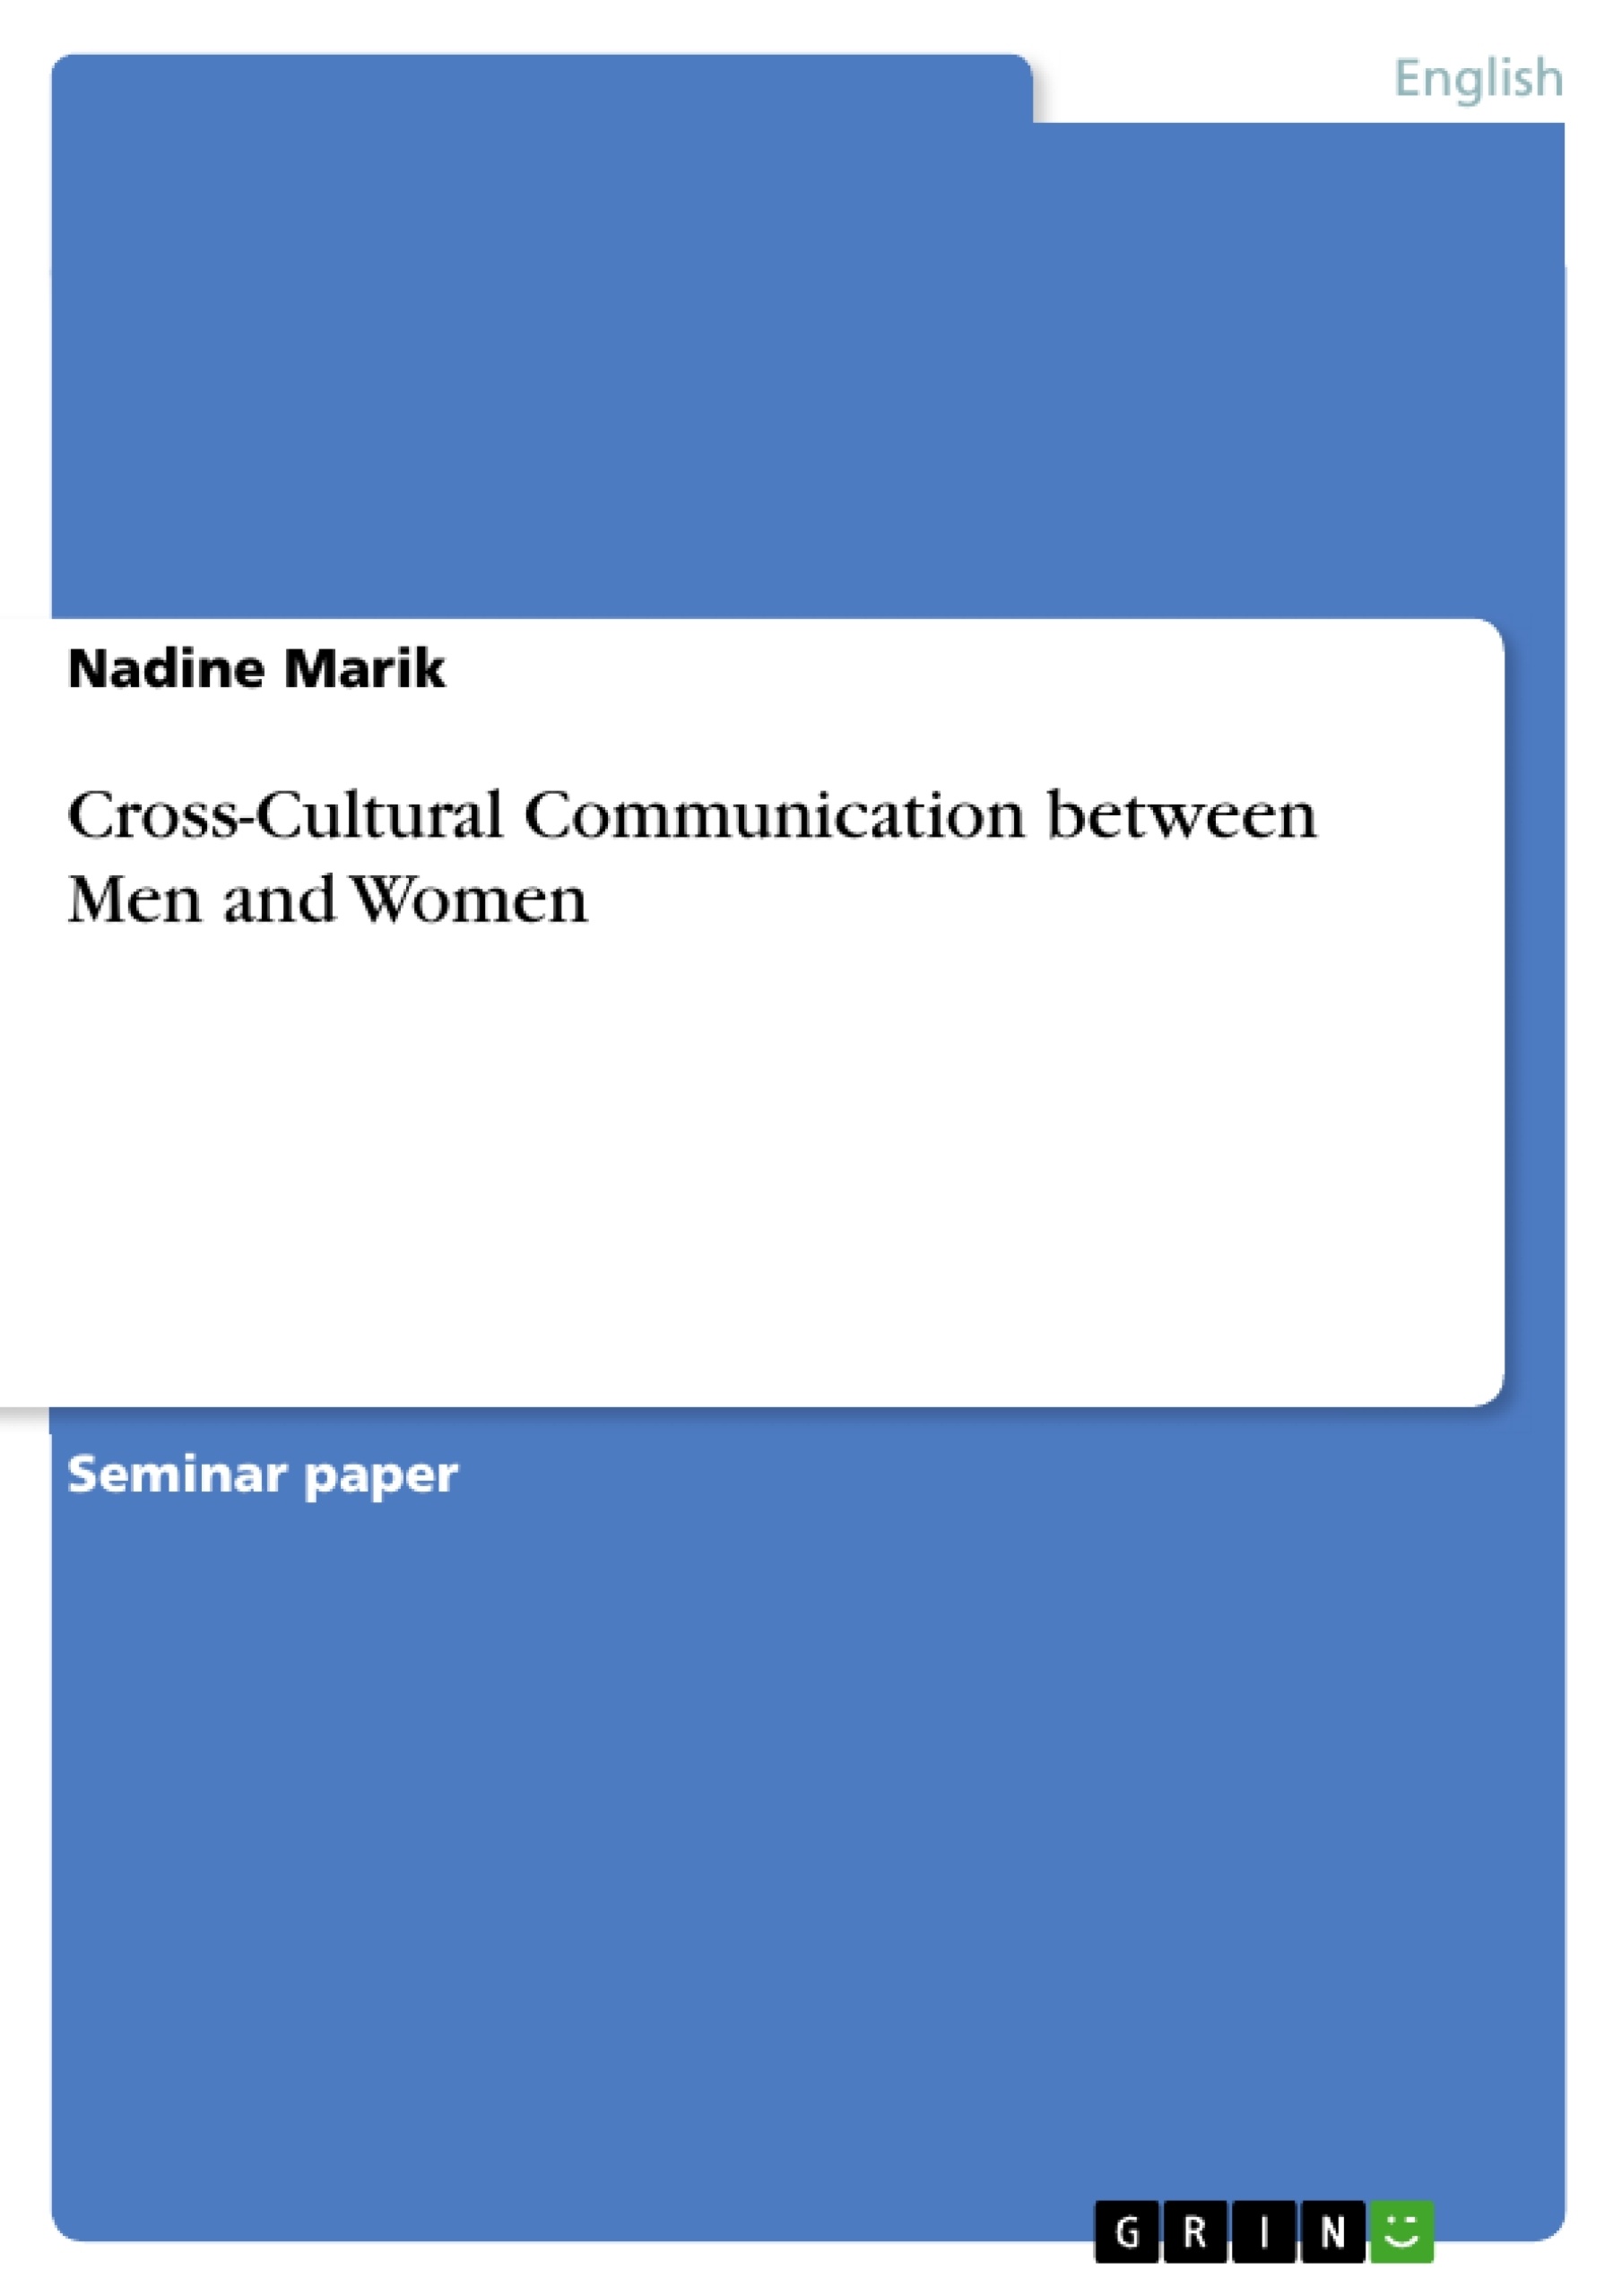 Compare and contrast essay on men and women communication